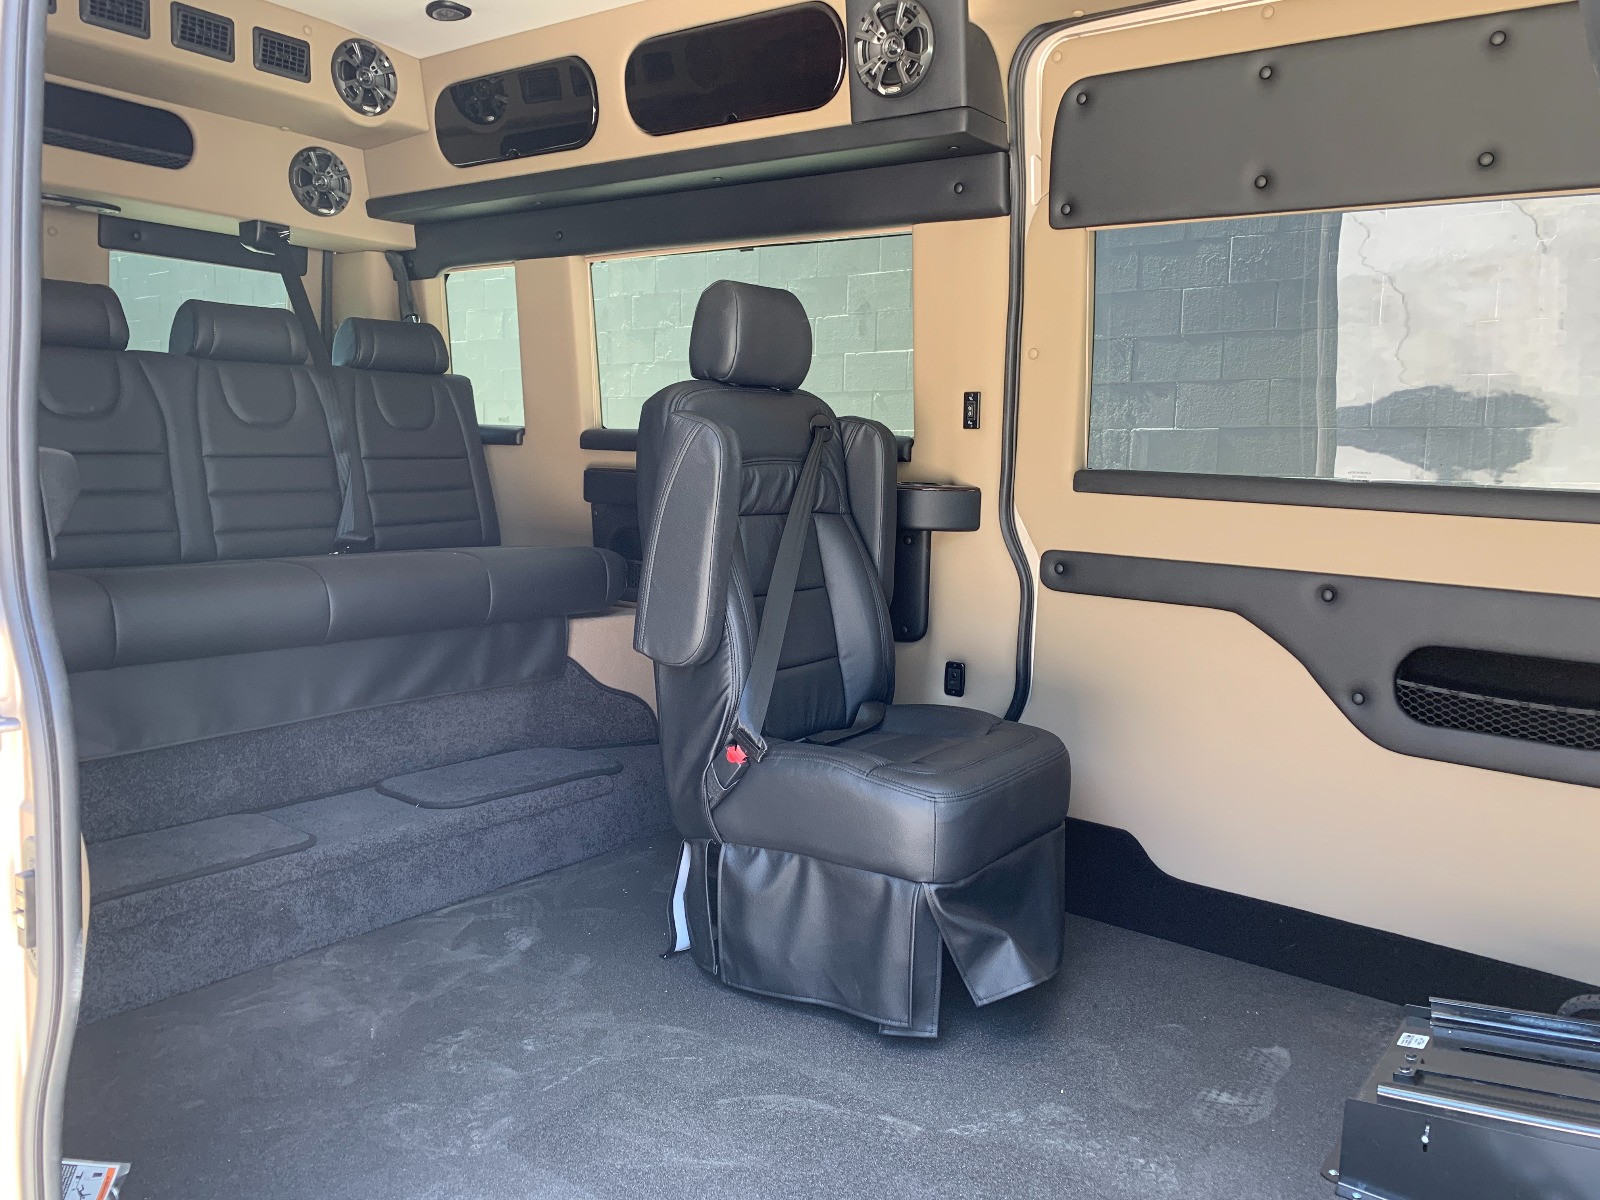 Interior and rear bench seat of Ram ProMaster Full Size Wheelchair Van with Tempest XL-HT Conversion